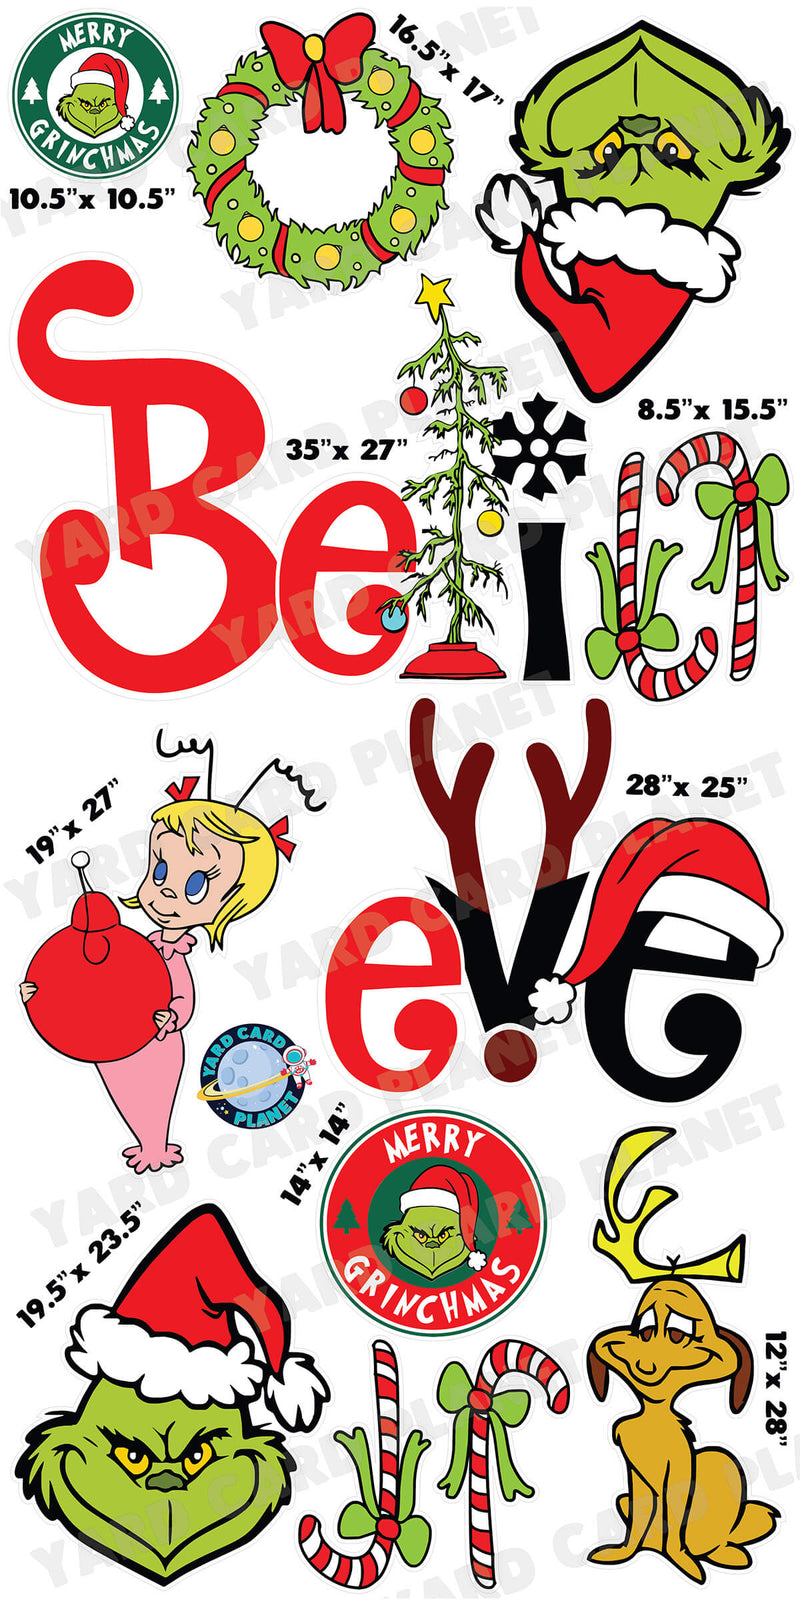 Merry Grinchmas Believe EZ Quick Set and Grinch Christmas Yard Card Flair Set with Measurements